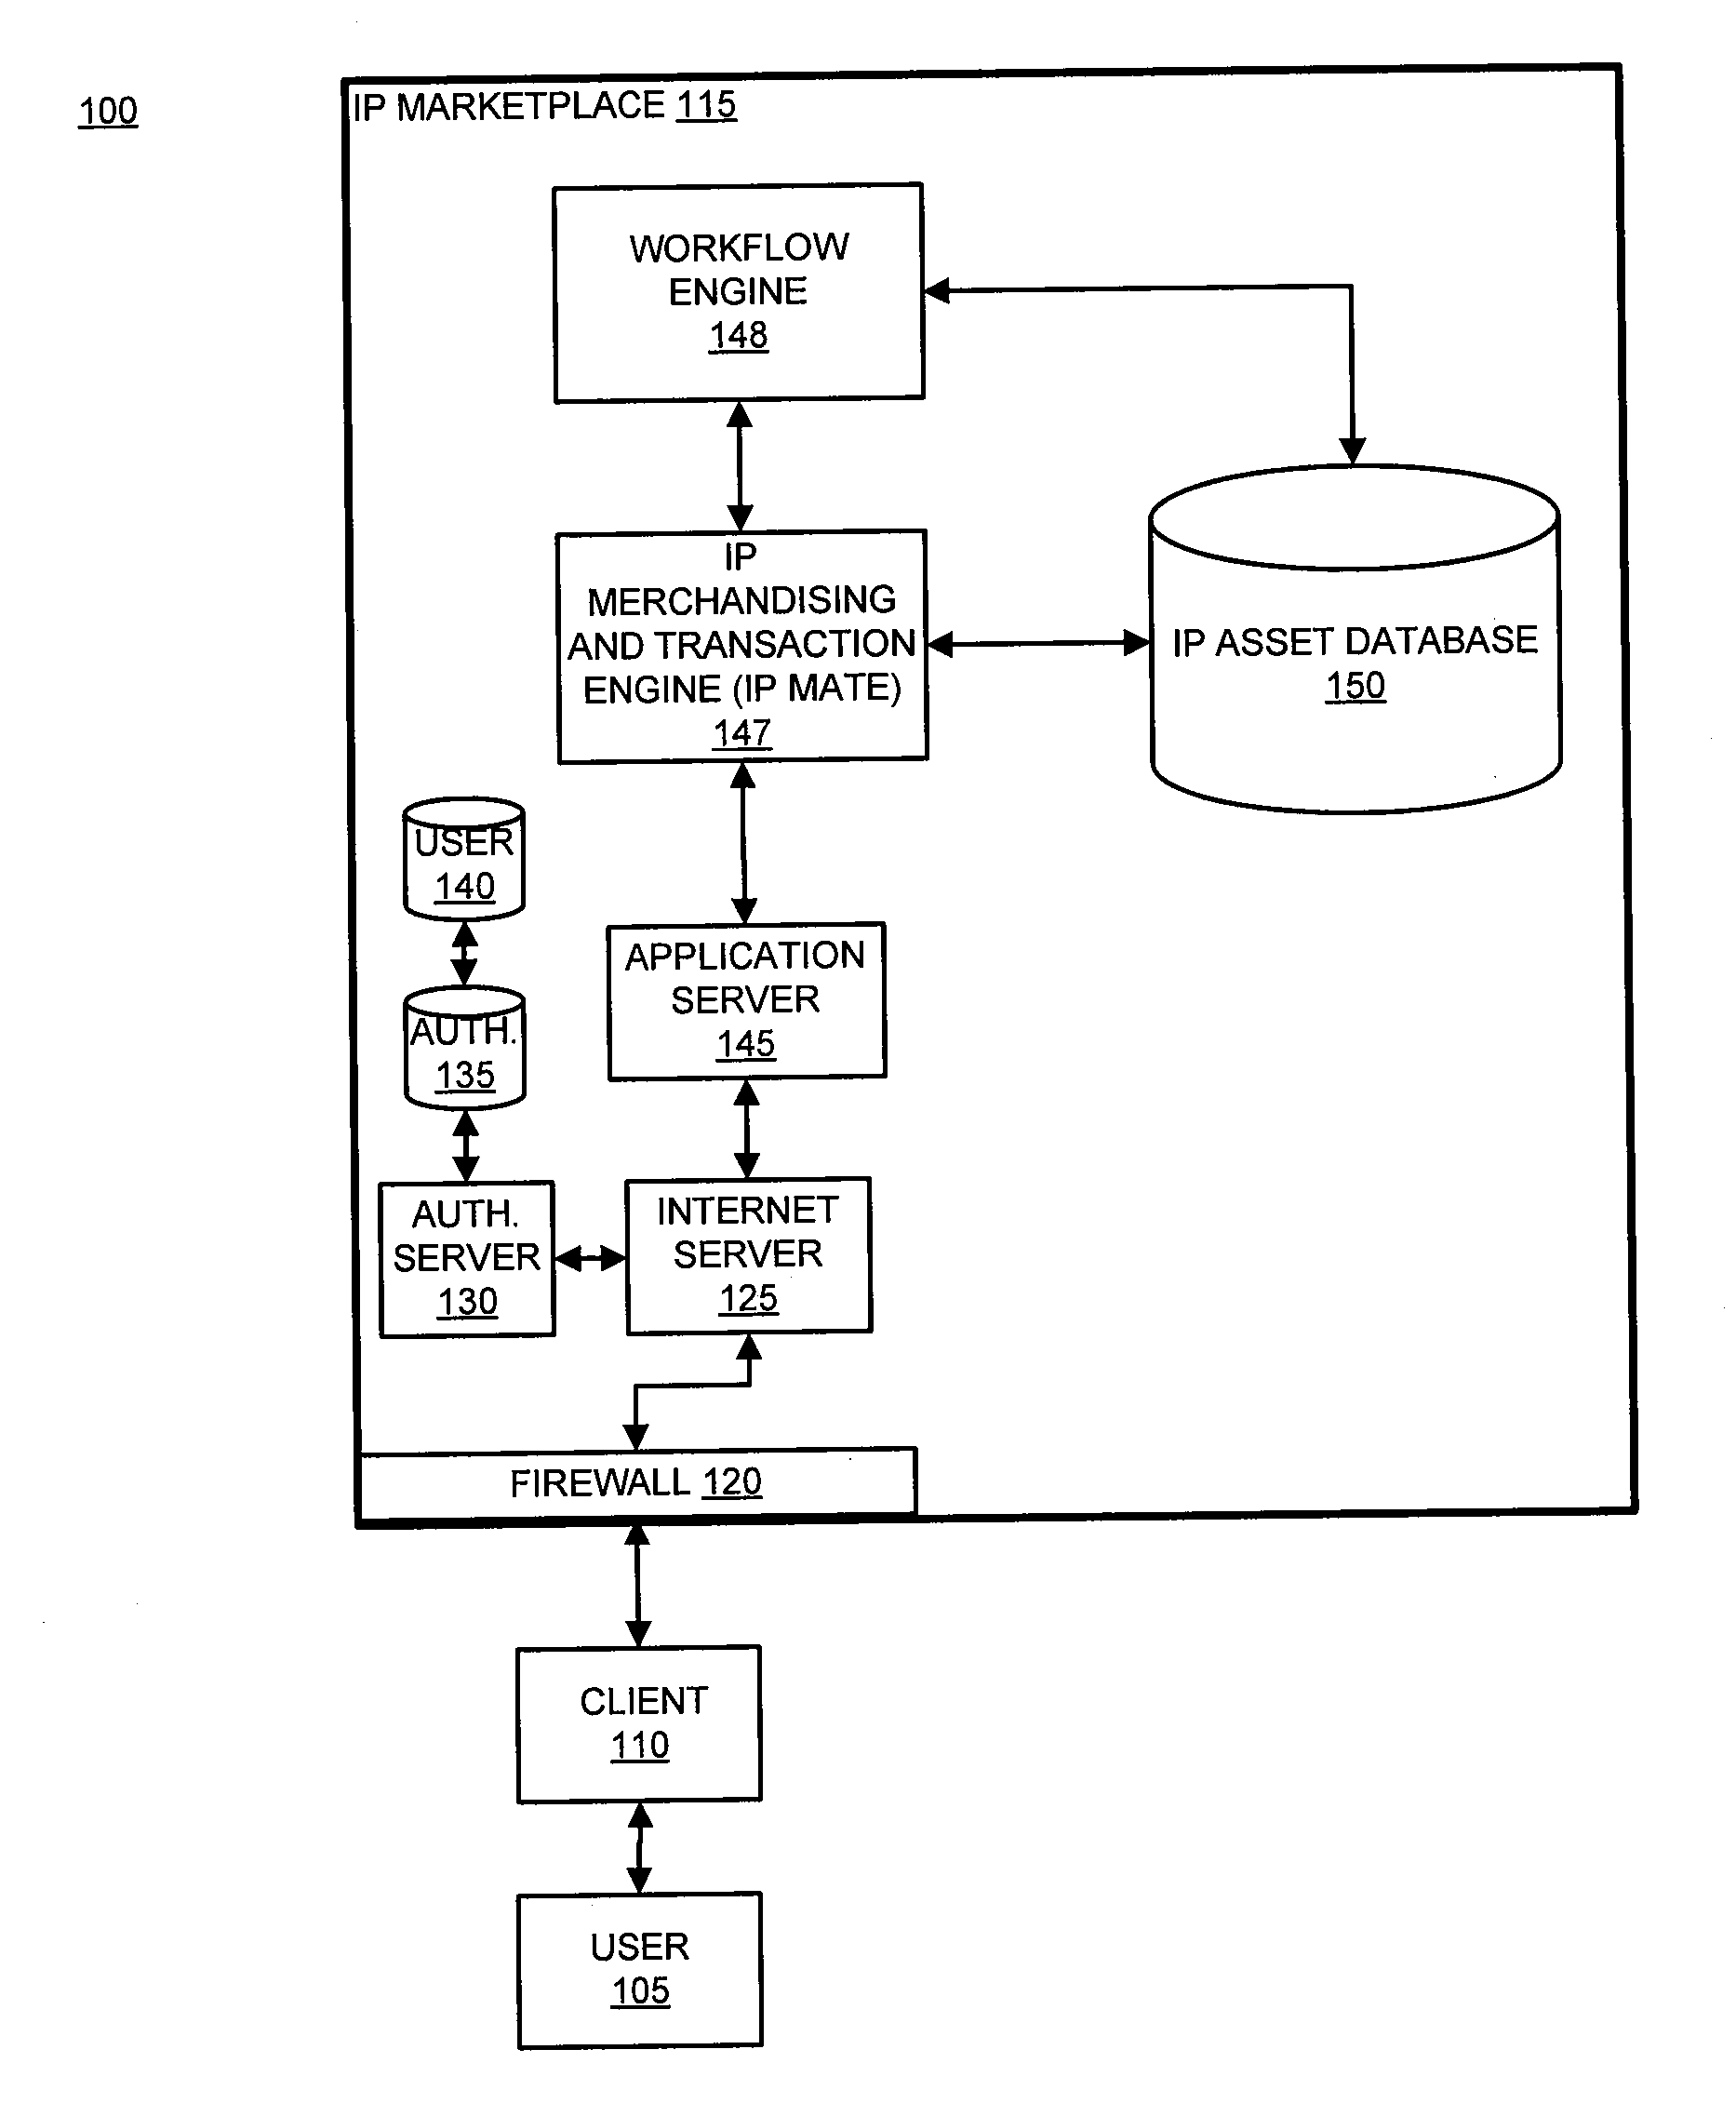 System and method for enabling product development